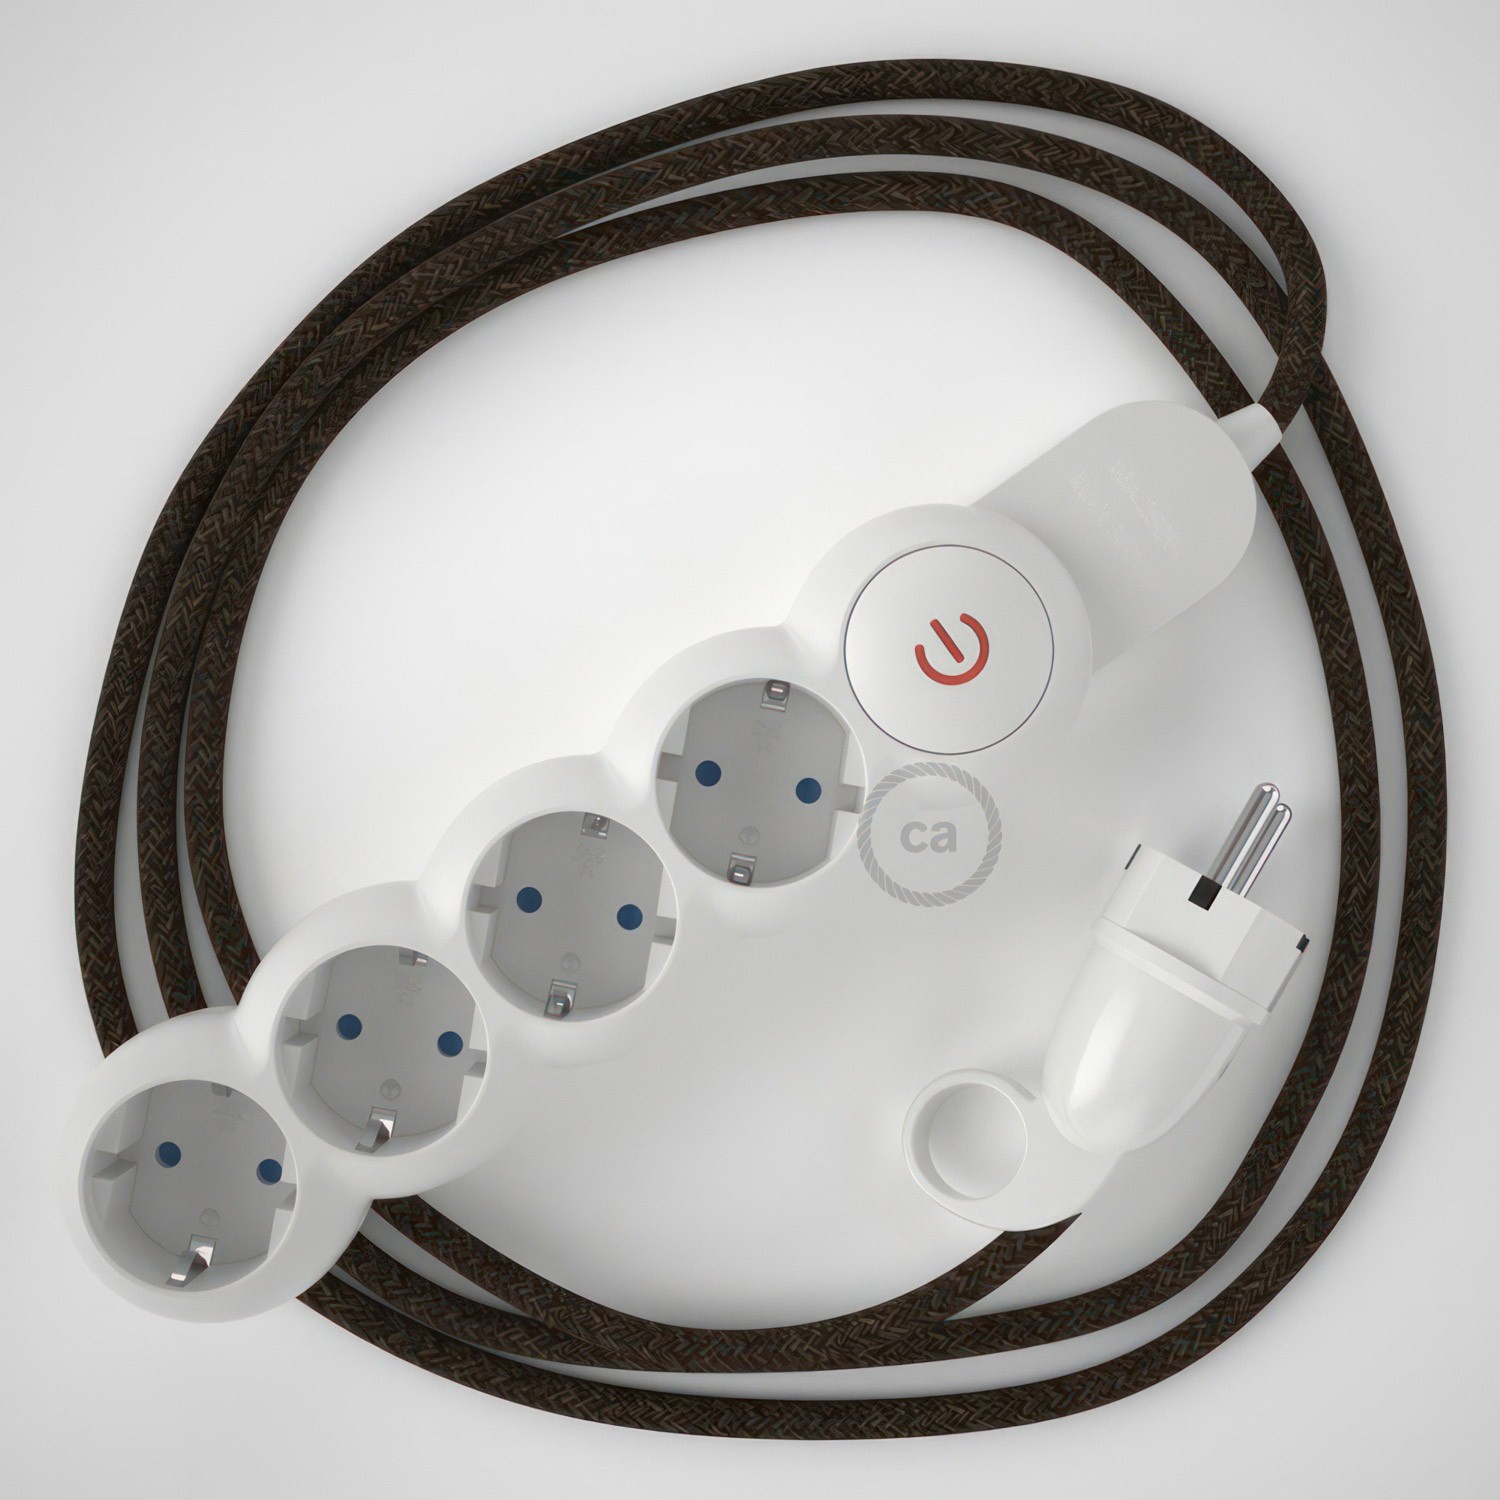 German Power Strip with electrical cable covered in Brown Natural Linen fabric RN04 and Schuko plug with confort ring